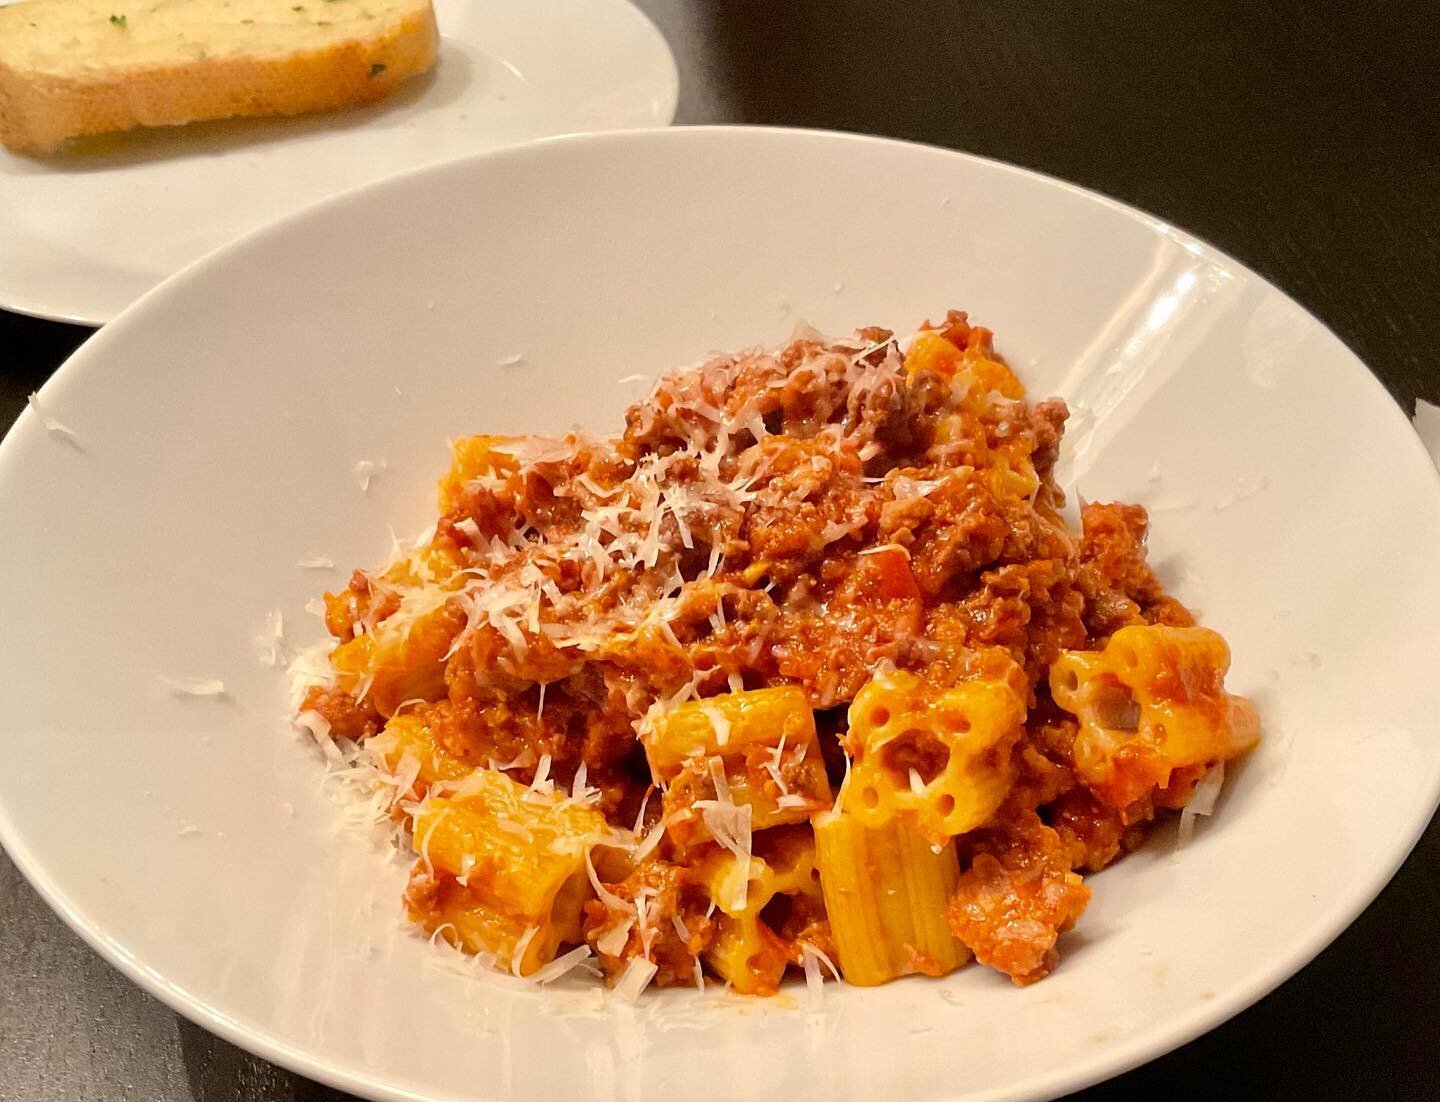 Got to try the new #quattrotini from @thesporkful last night with tasty Bolognese. This new shape is so fun!